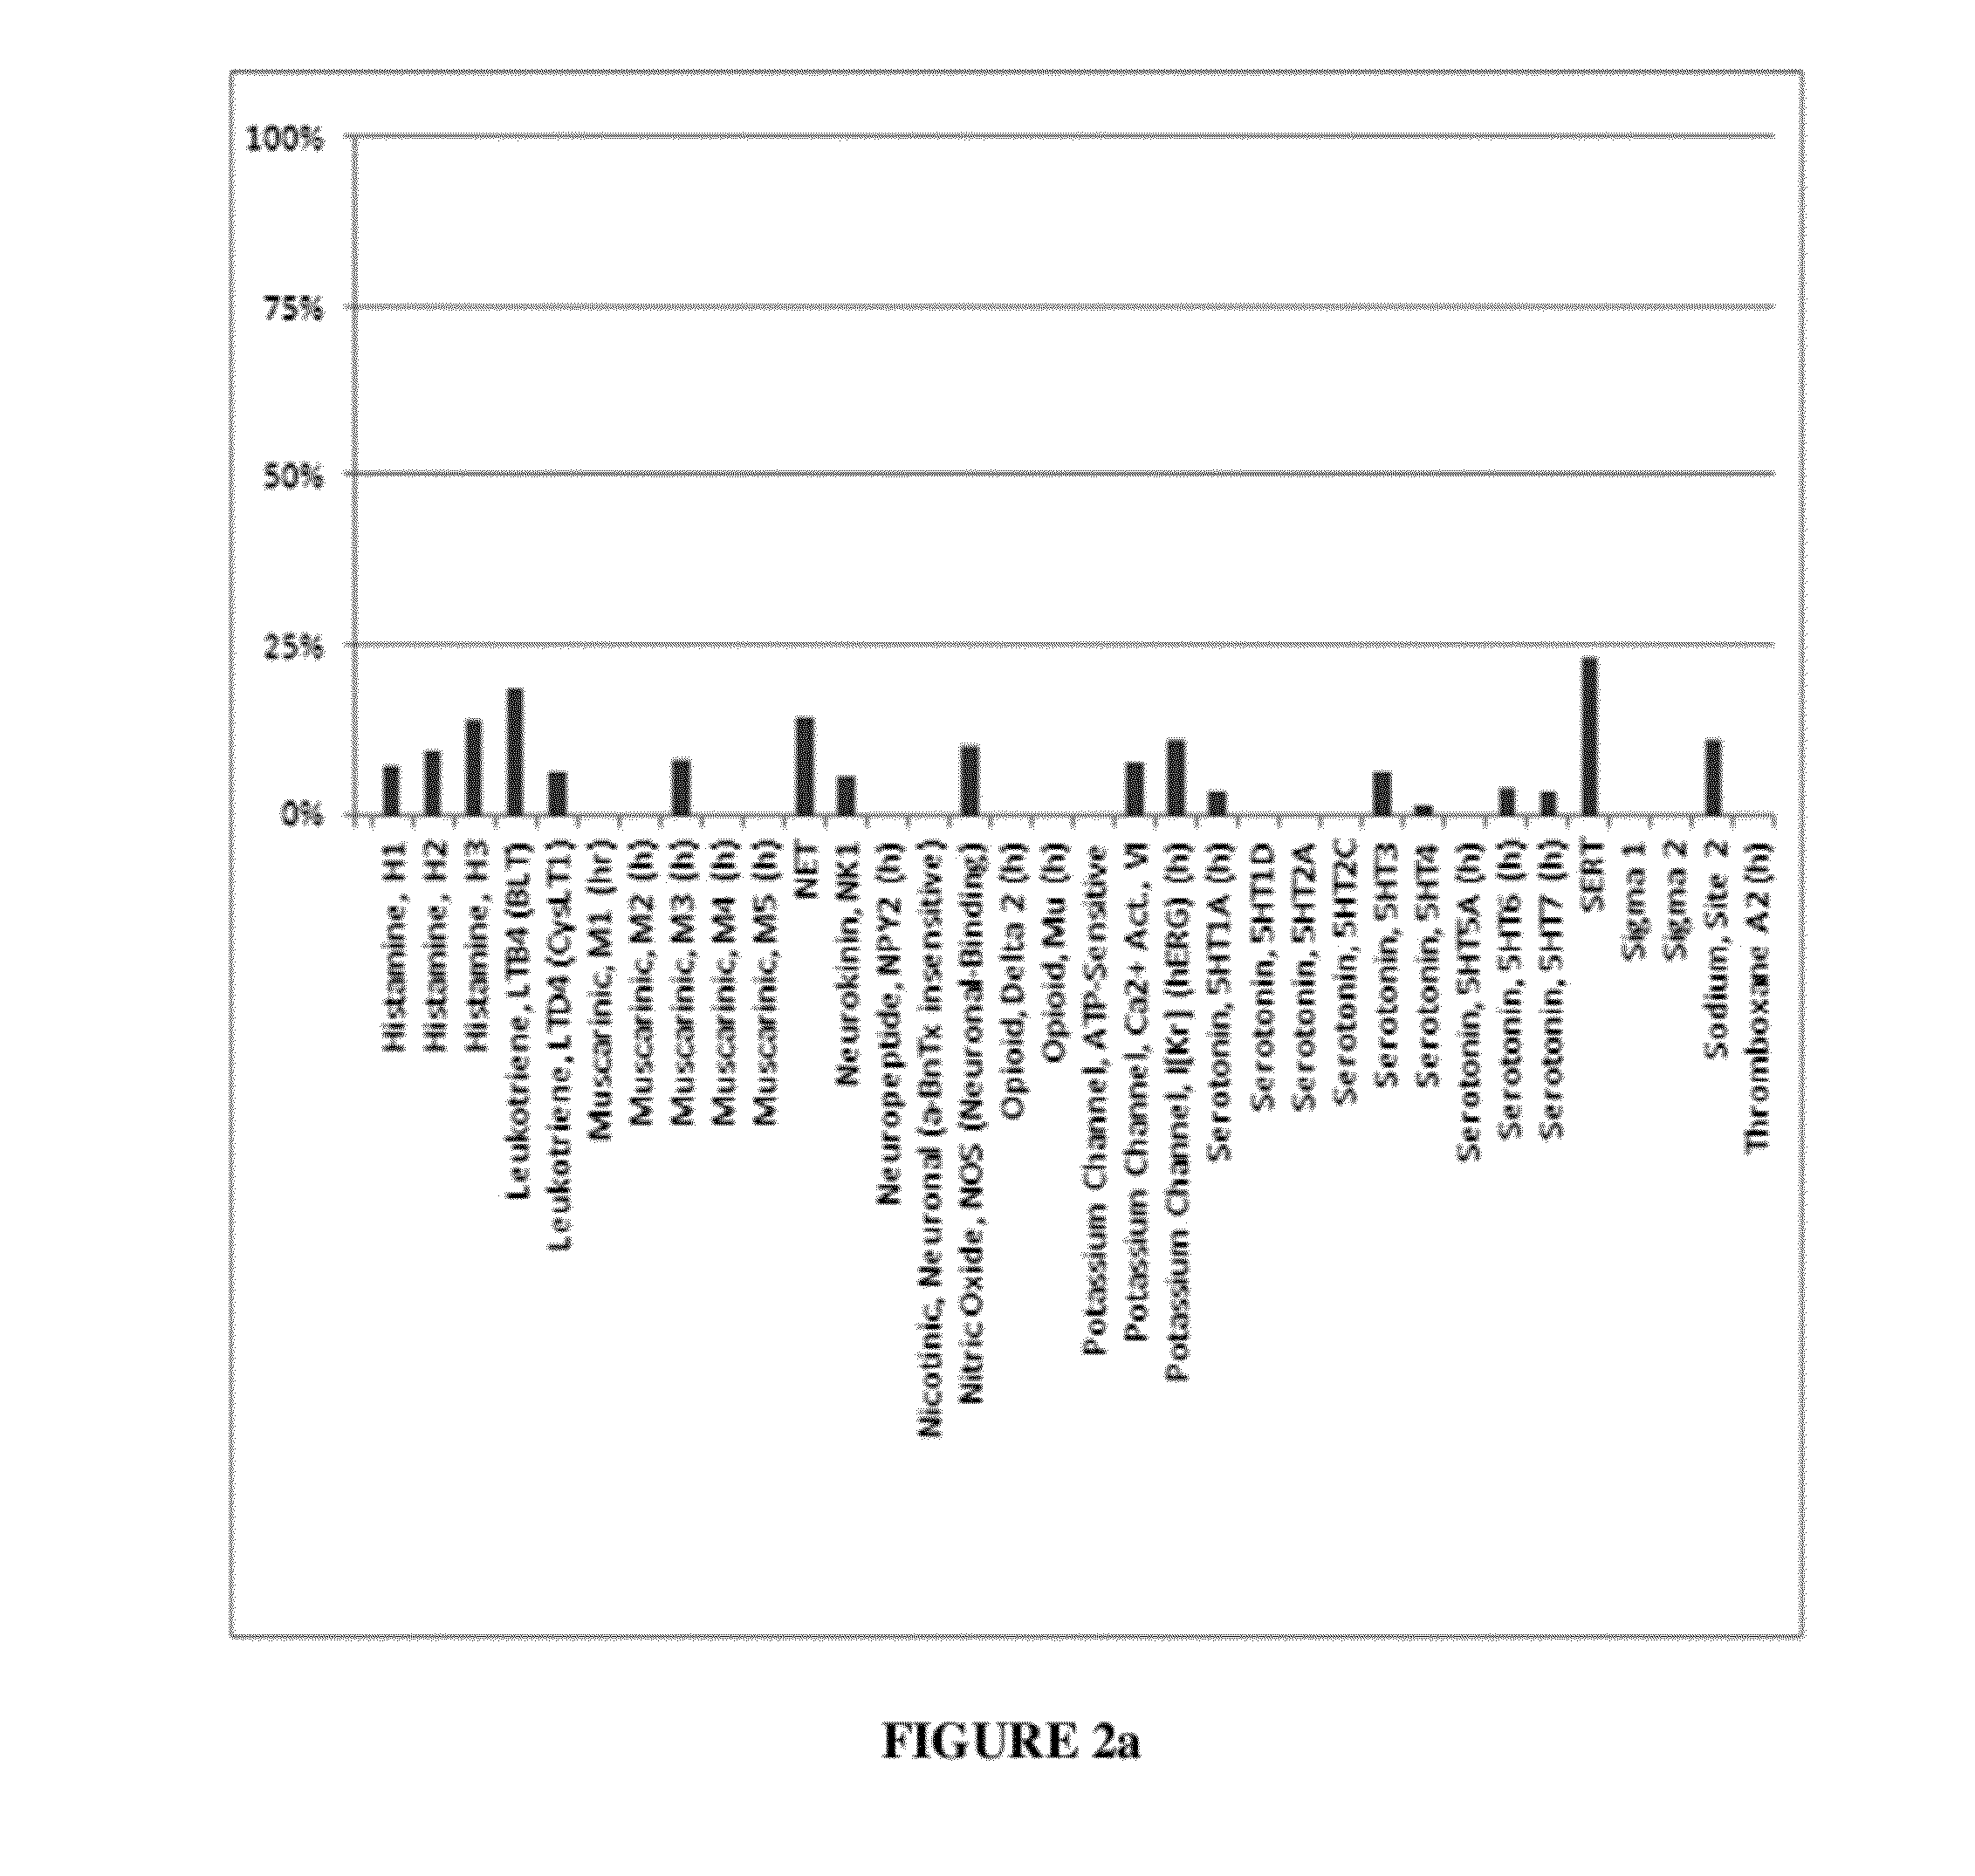 Method of using dopamine reuptake inhibitors and their analogs for treating autoimmune conditions and delaying or preventing autoimmune related pathologic progressions